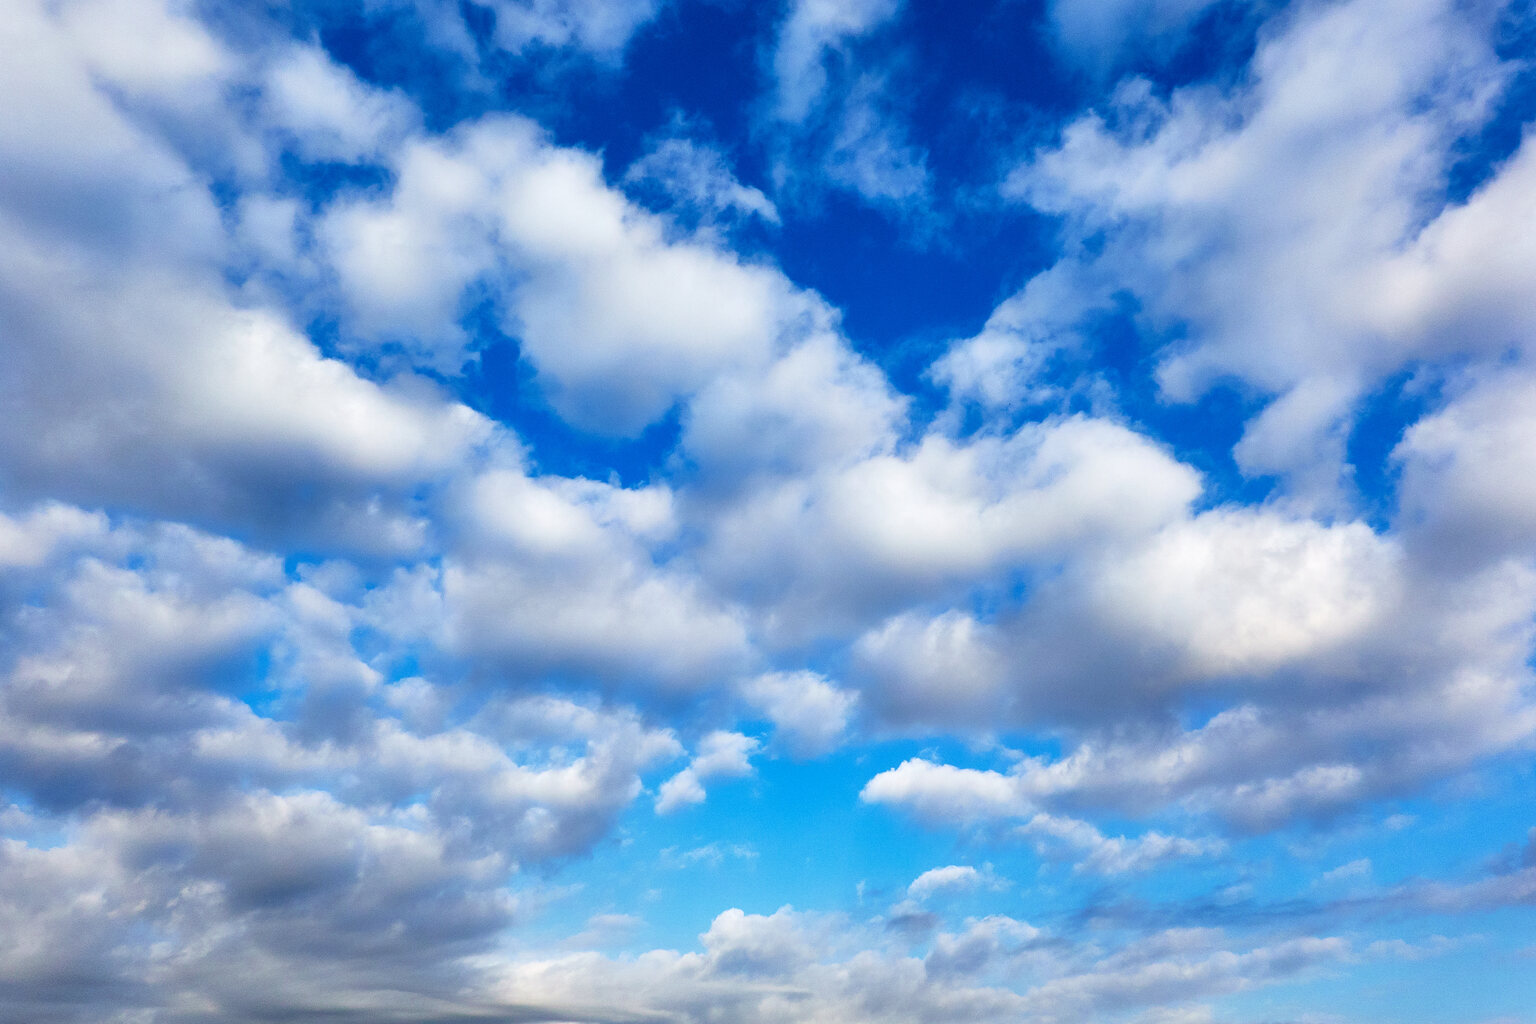 Low Angle View Of Clouds In Blue Sky in Fujisawa, Japan,